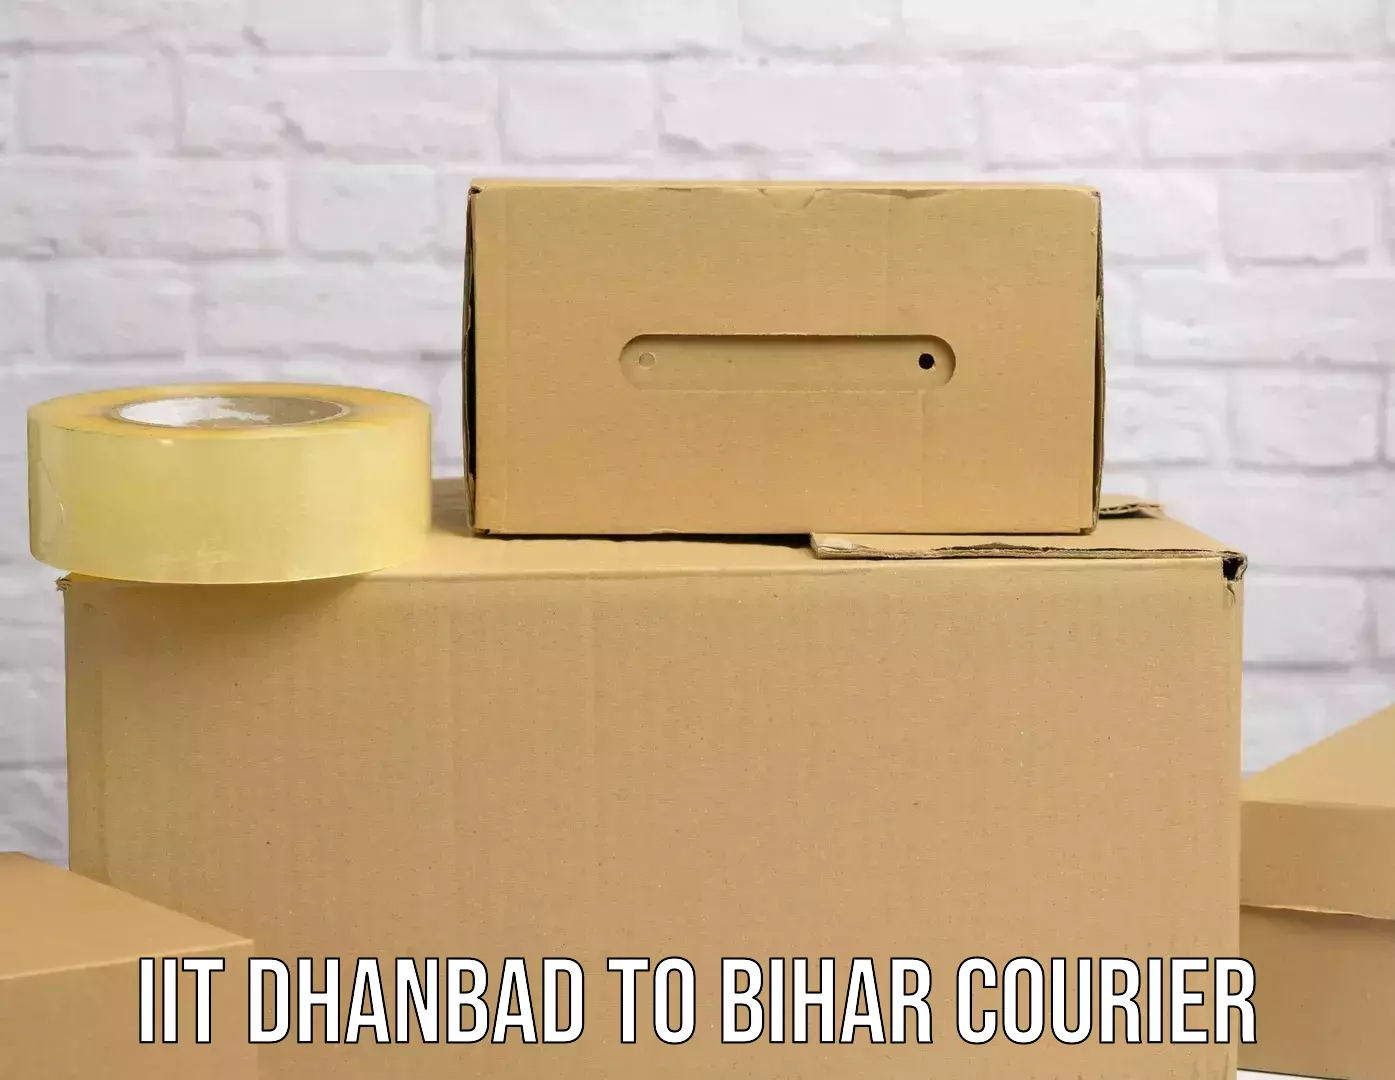 End-to-end delivery IIT Dhanbad to Bihar